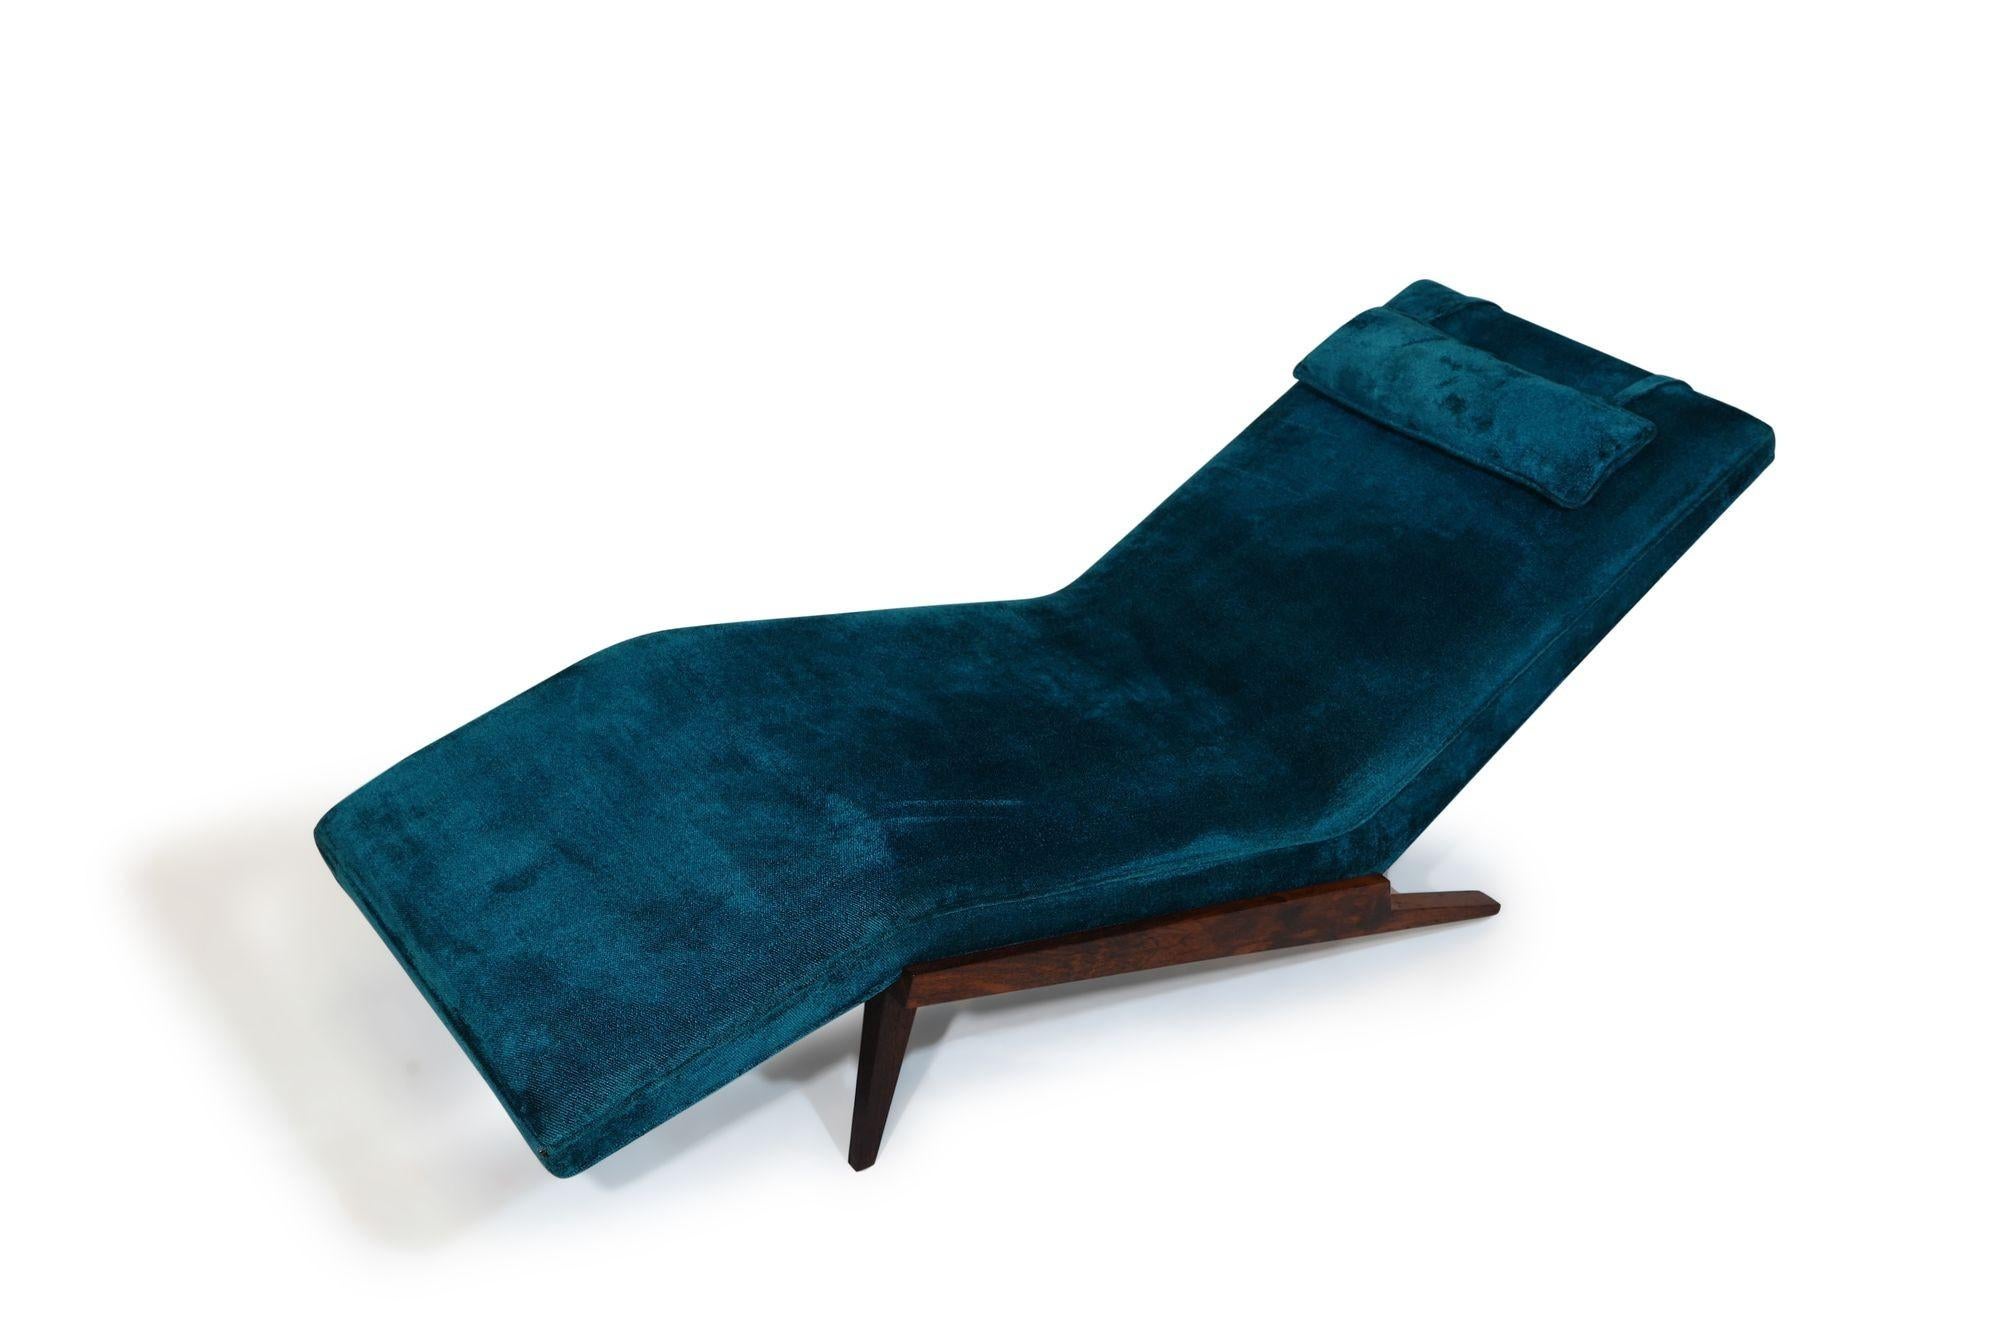 1960s Brazilian Modern chaise lounge, crafted with a striking angled form and a solid jacaranda rosewood base. Its high-quality construction and stunning wood base are complemented by vintage turquoise velvet upholstery, which can be used as-found